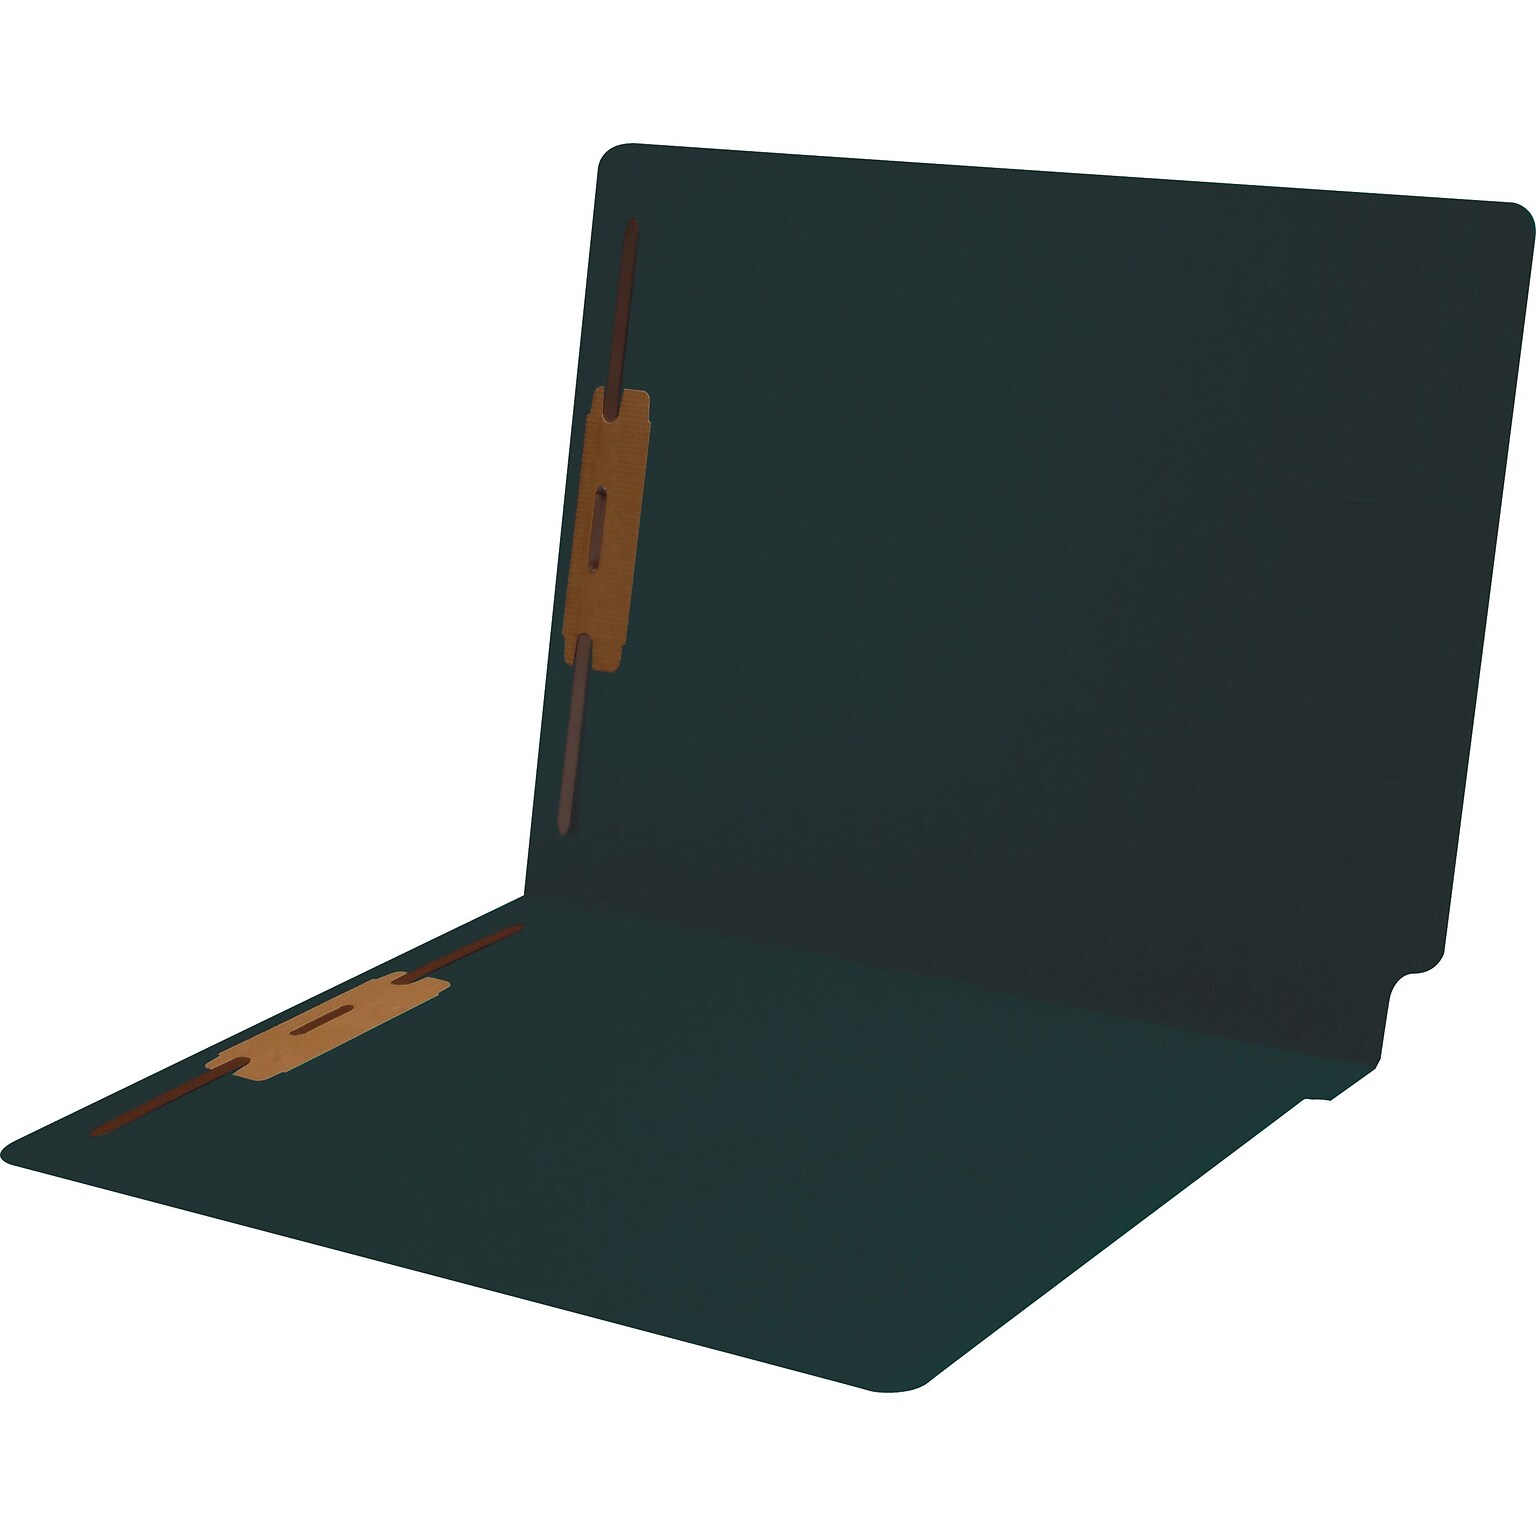 Medical Arts Press® End-Tab Folders; Positions 1 and 3 Fasteners, Dark Green, 50/Box